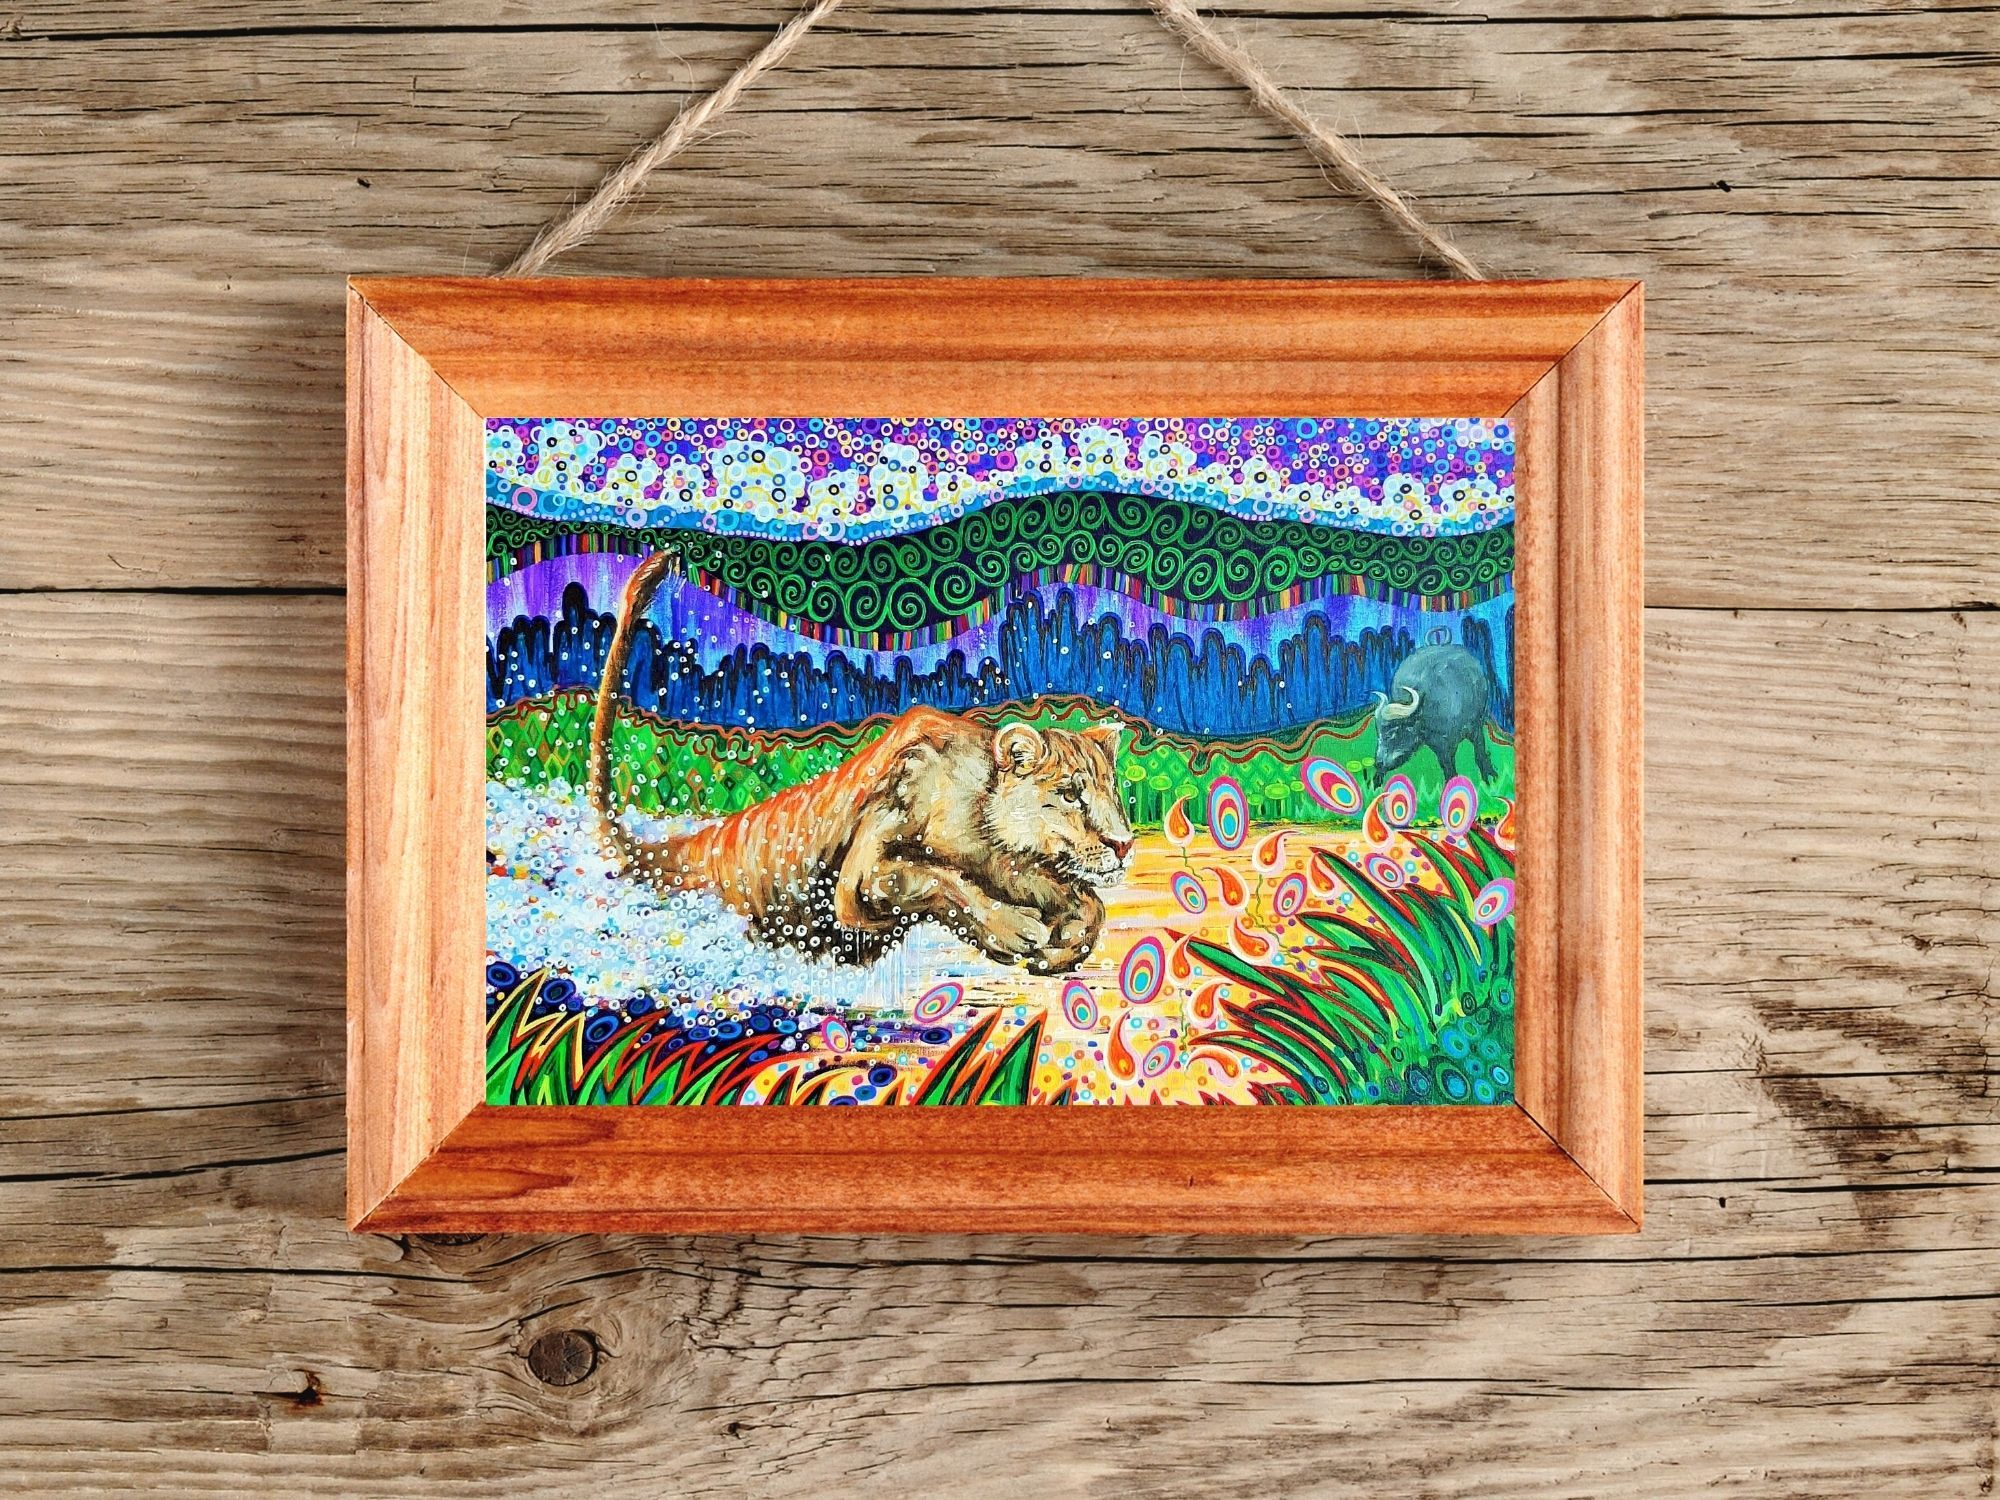 Colourful lion art print, download and print at home, in a wood effect frame (not available to purchase).